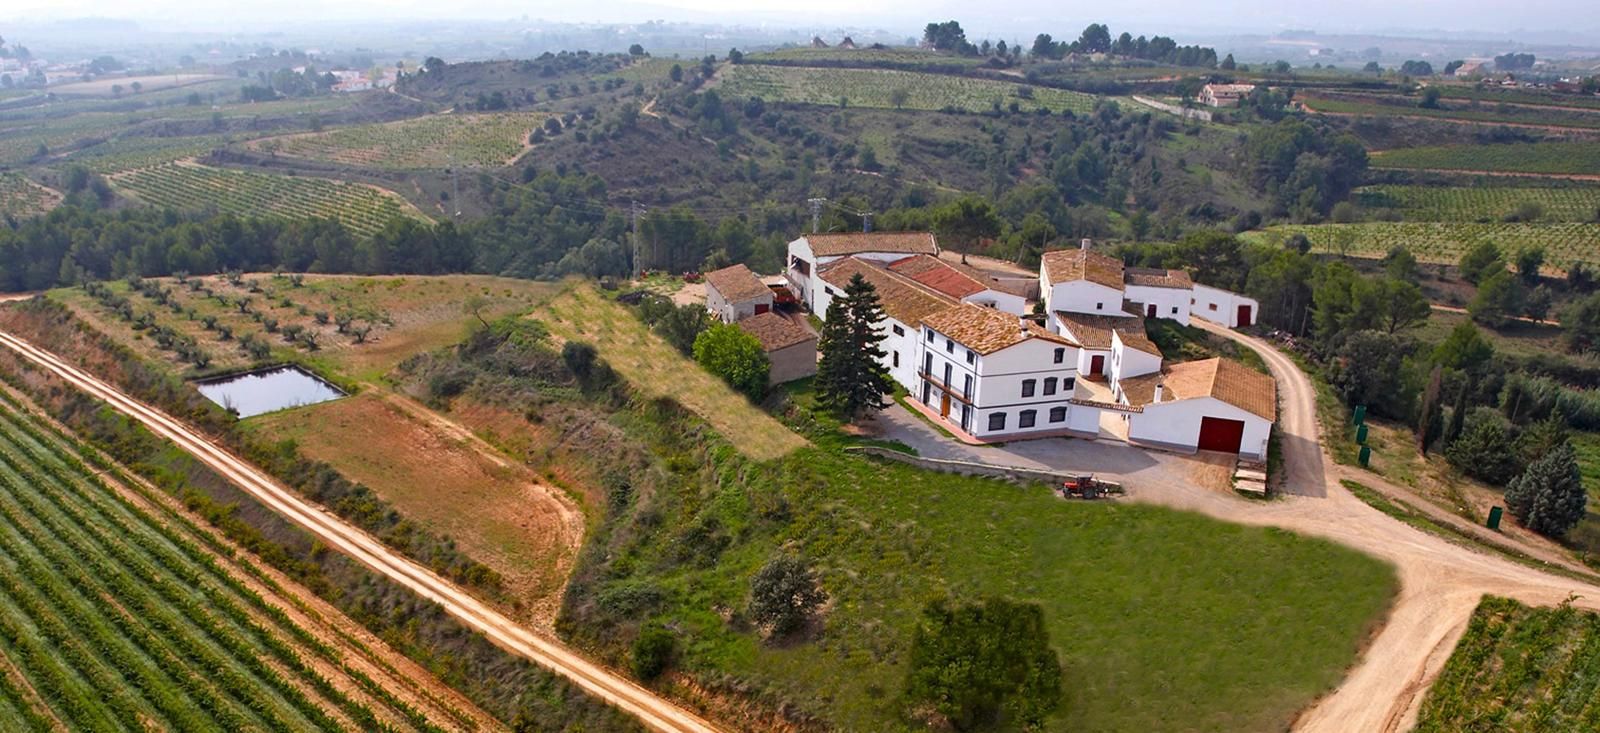 The aeric photo of the winery